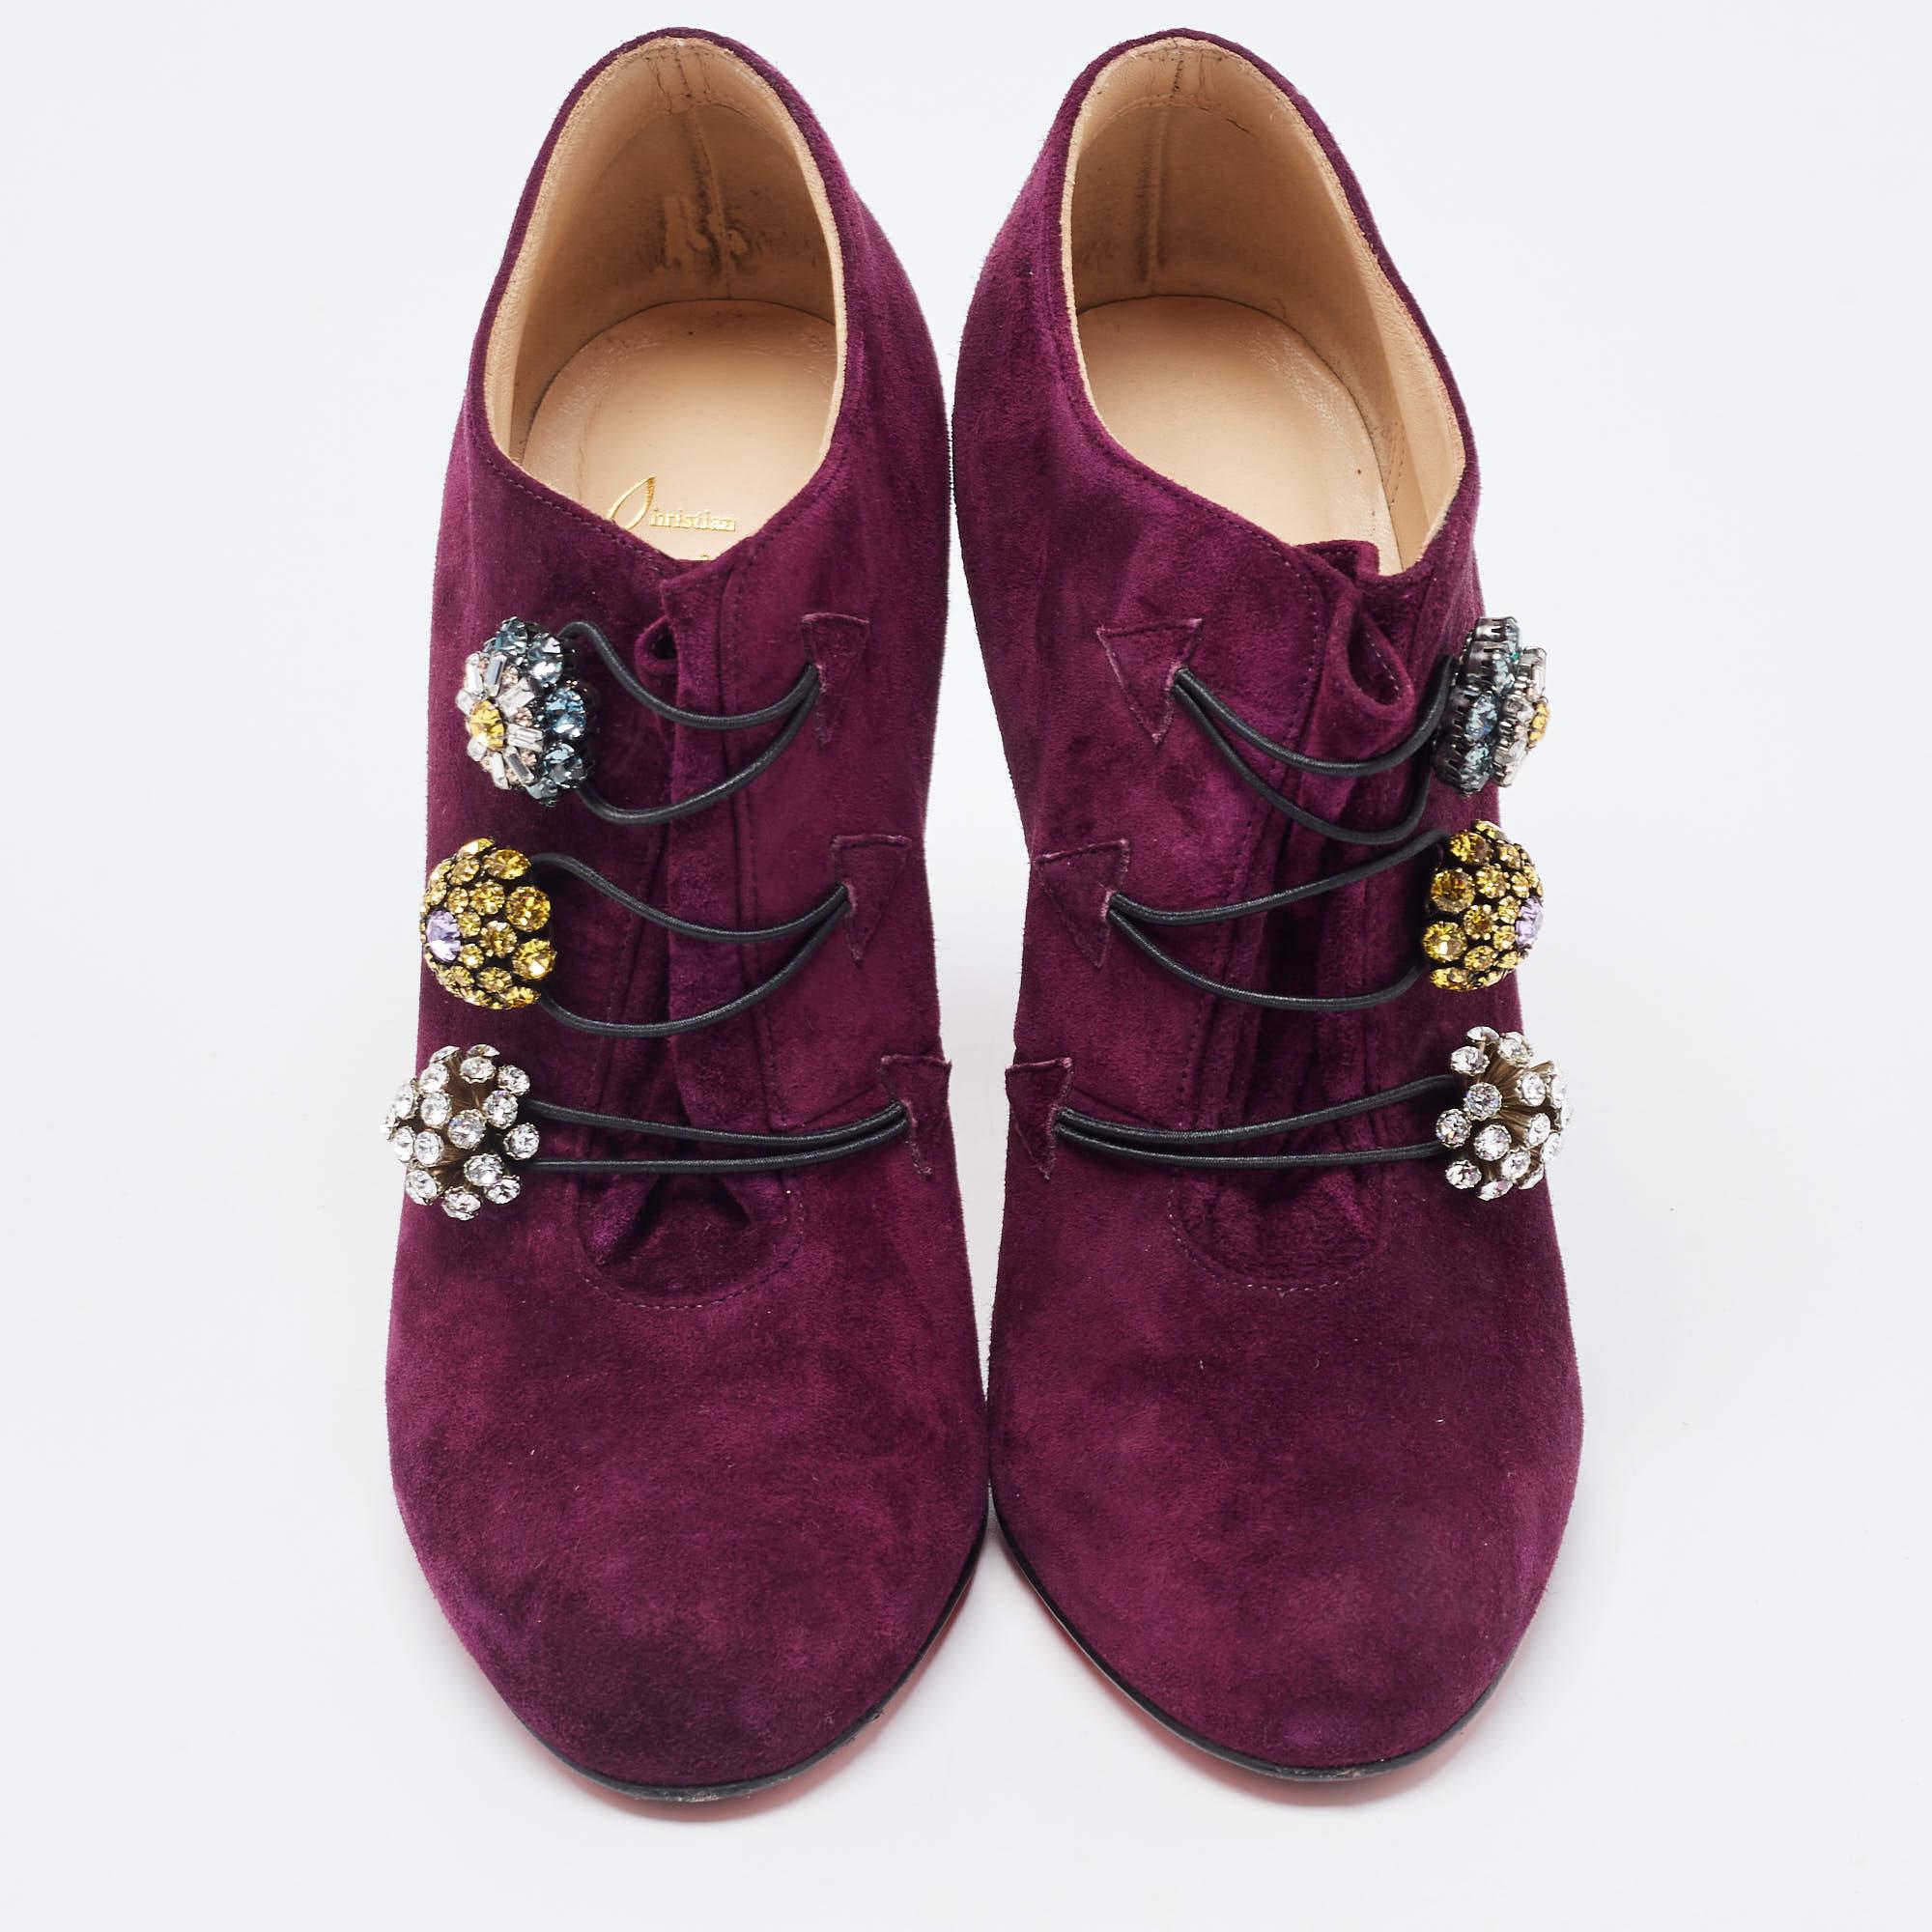 Fashionable and edgy, Christian Louboutin’s booties are crafted in purple suede. These round-toe booties feature striking motifs on the upper and are elevated on 11cm heels. They are finished with the signature red soles.

Includes
Original Box, The